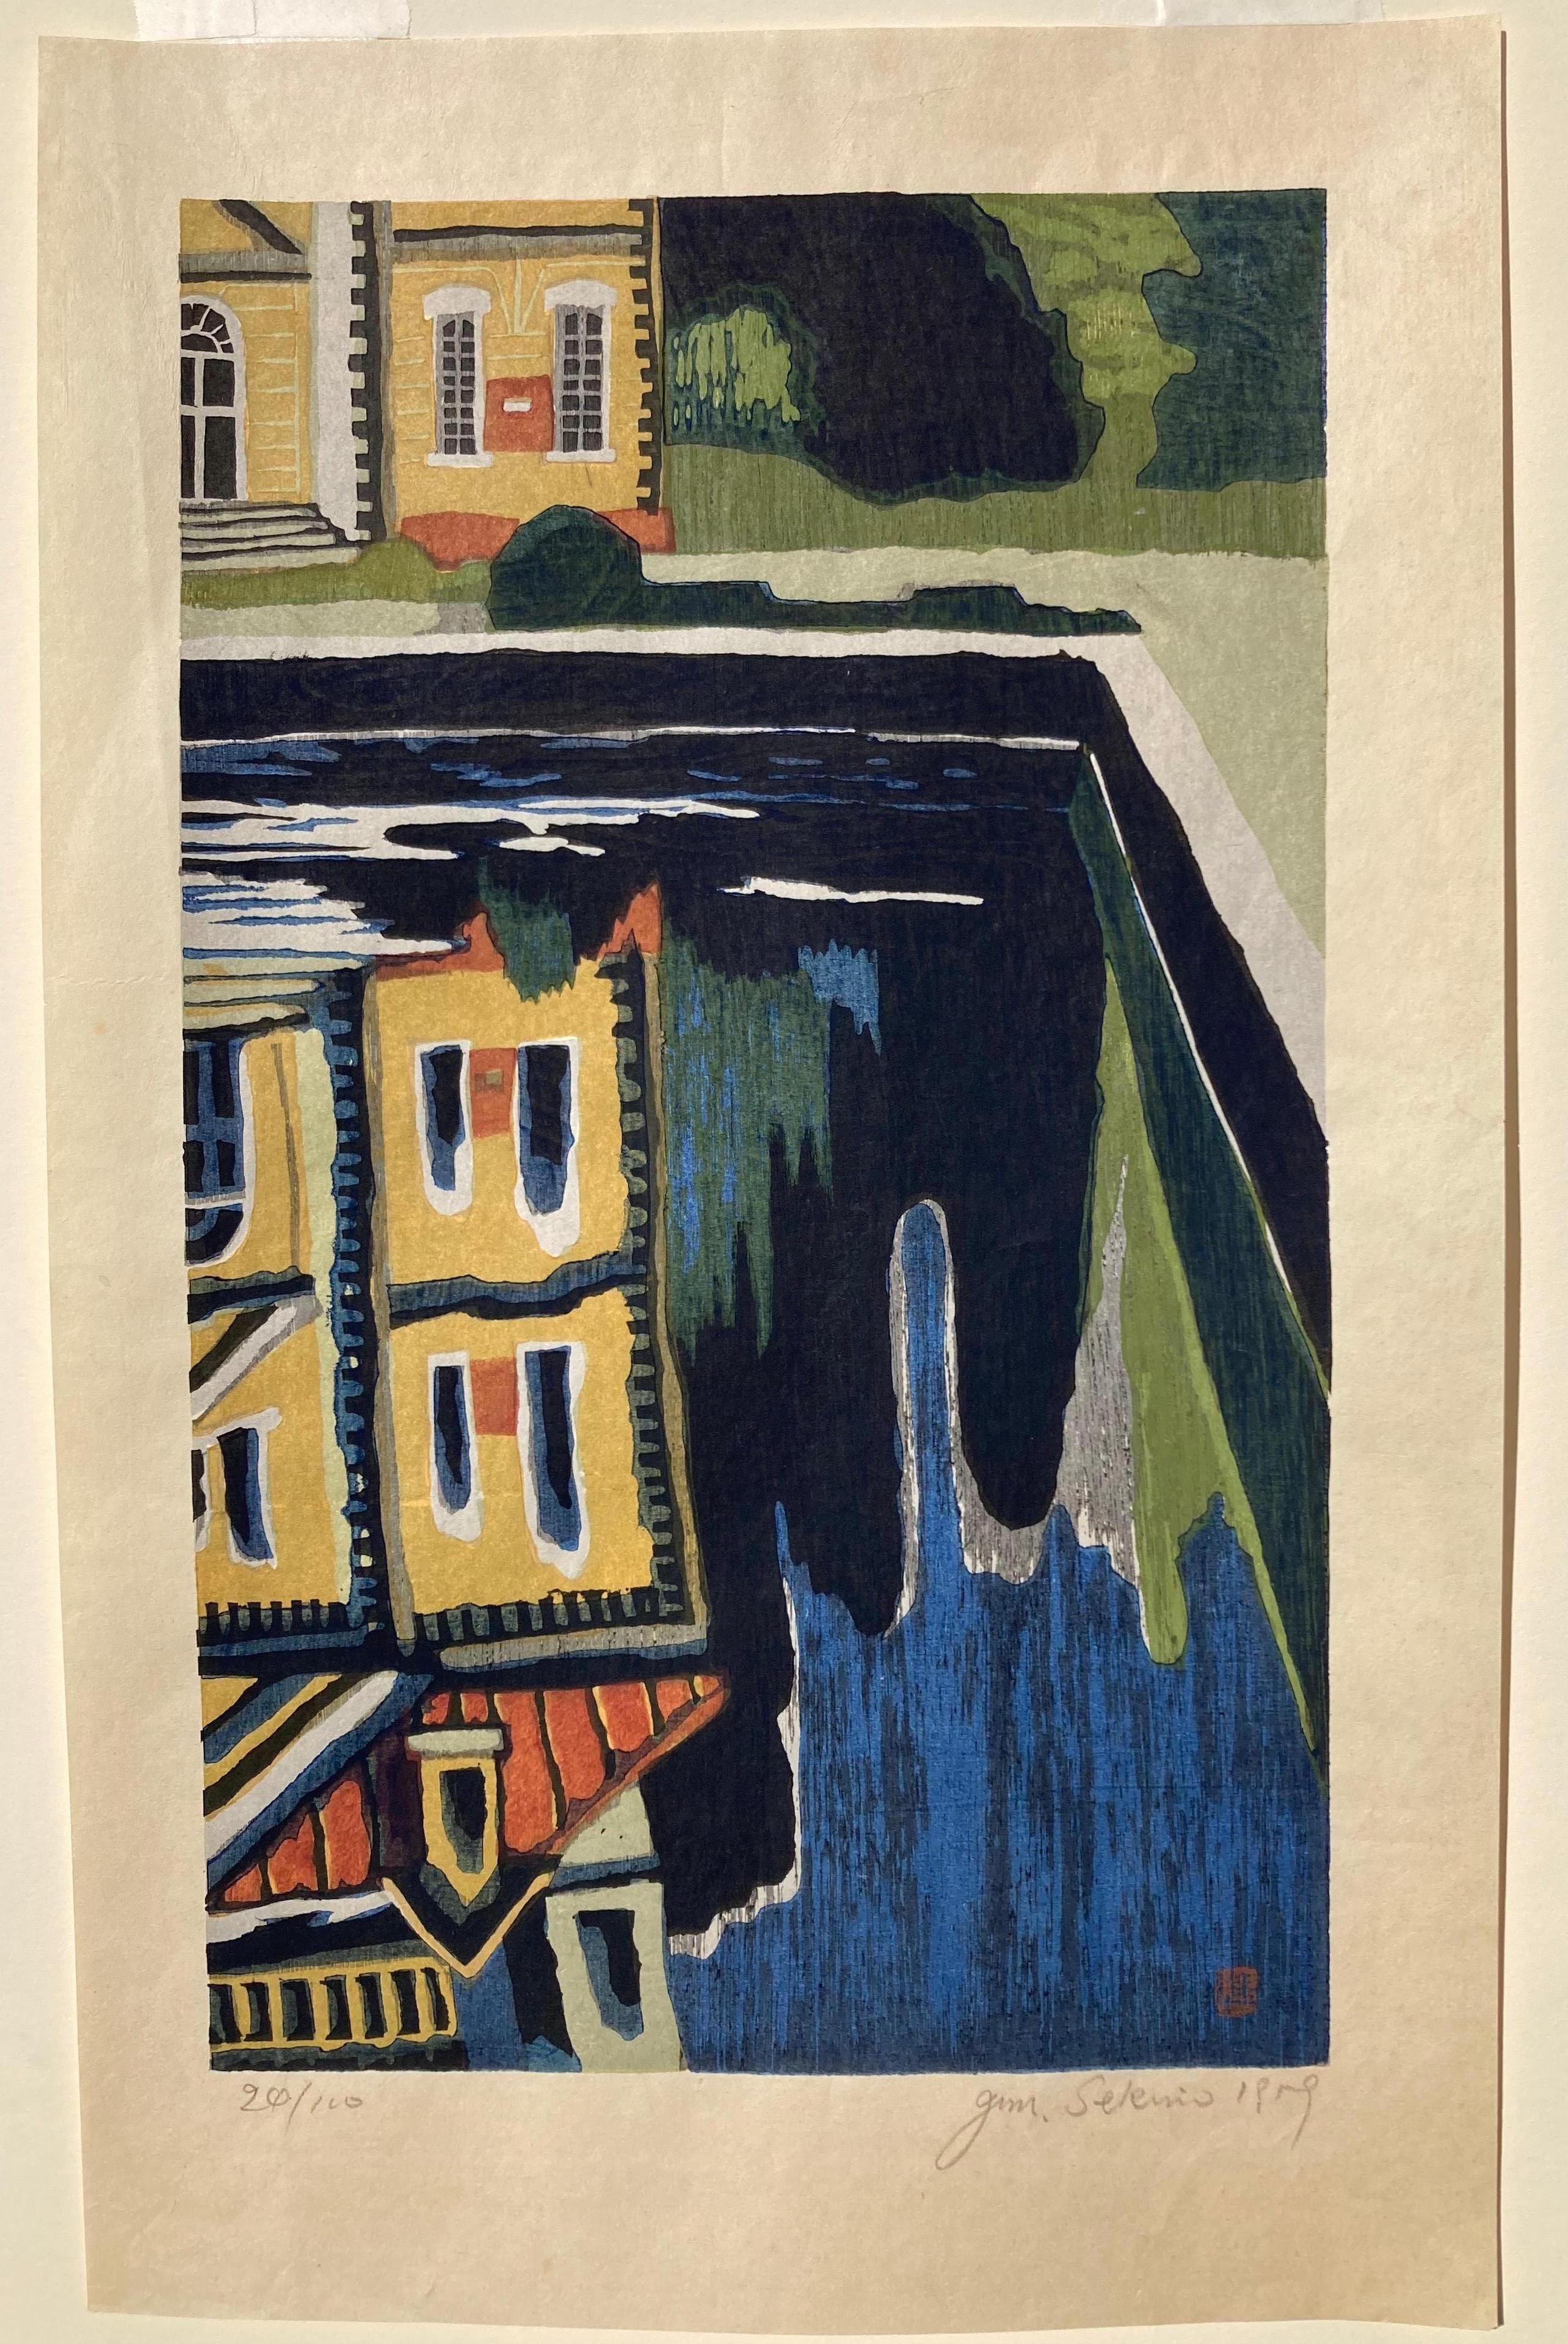 JUN’ICHIRO SEKINO (Japanese 1914 -1988) 

UNTITLED REFLECTIONS, 1959
Color woodcut, signed and numbered in pencil 20/100. Image 16 ¾“x 10 1/8”. Sheet 20 ½” x 12 ¾”
Beautiful, rich impression in good condition save for slight minor foxing in lower